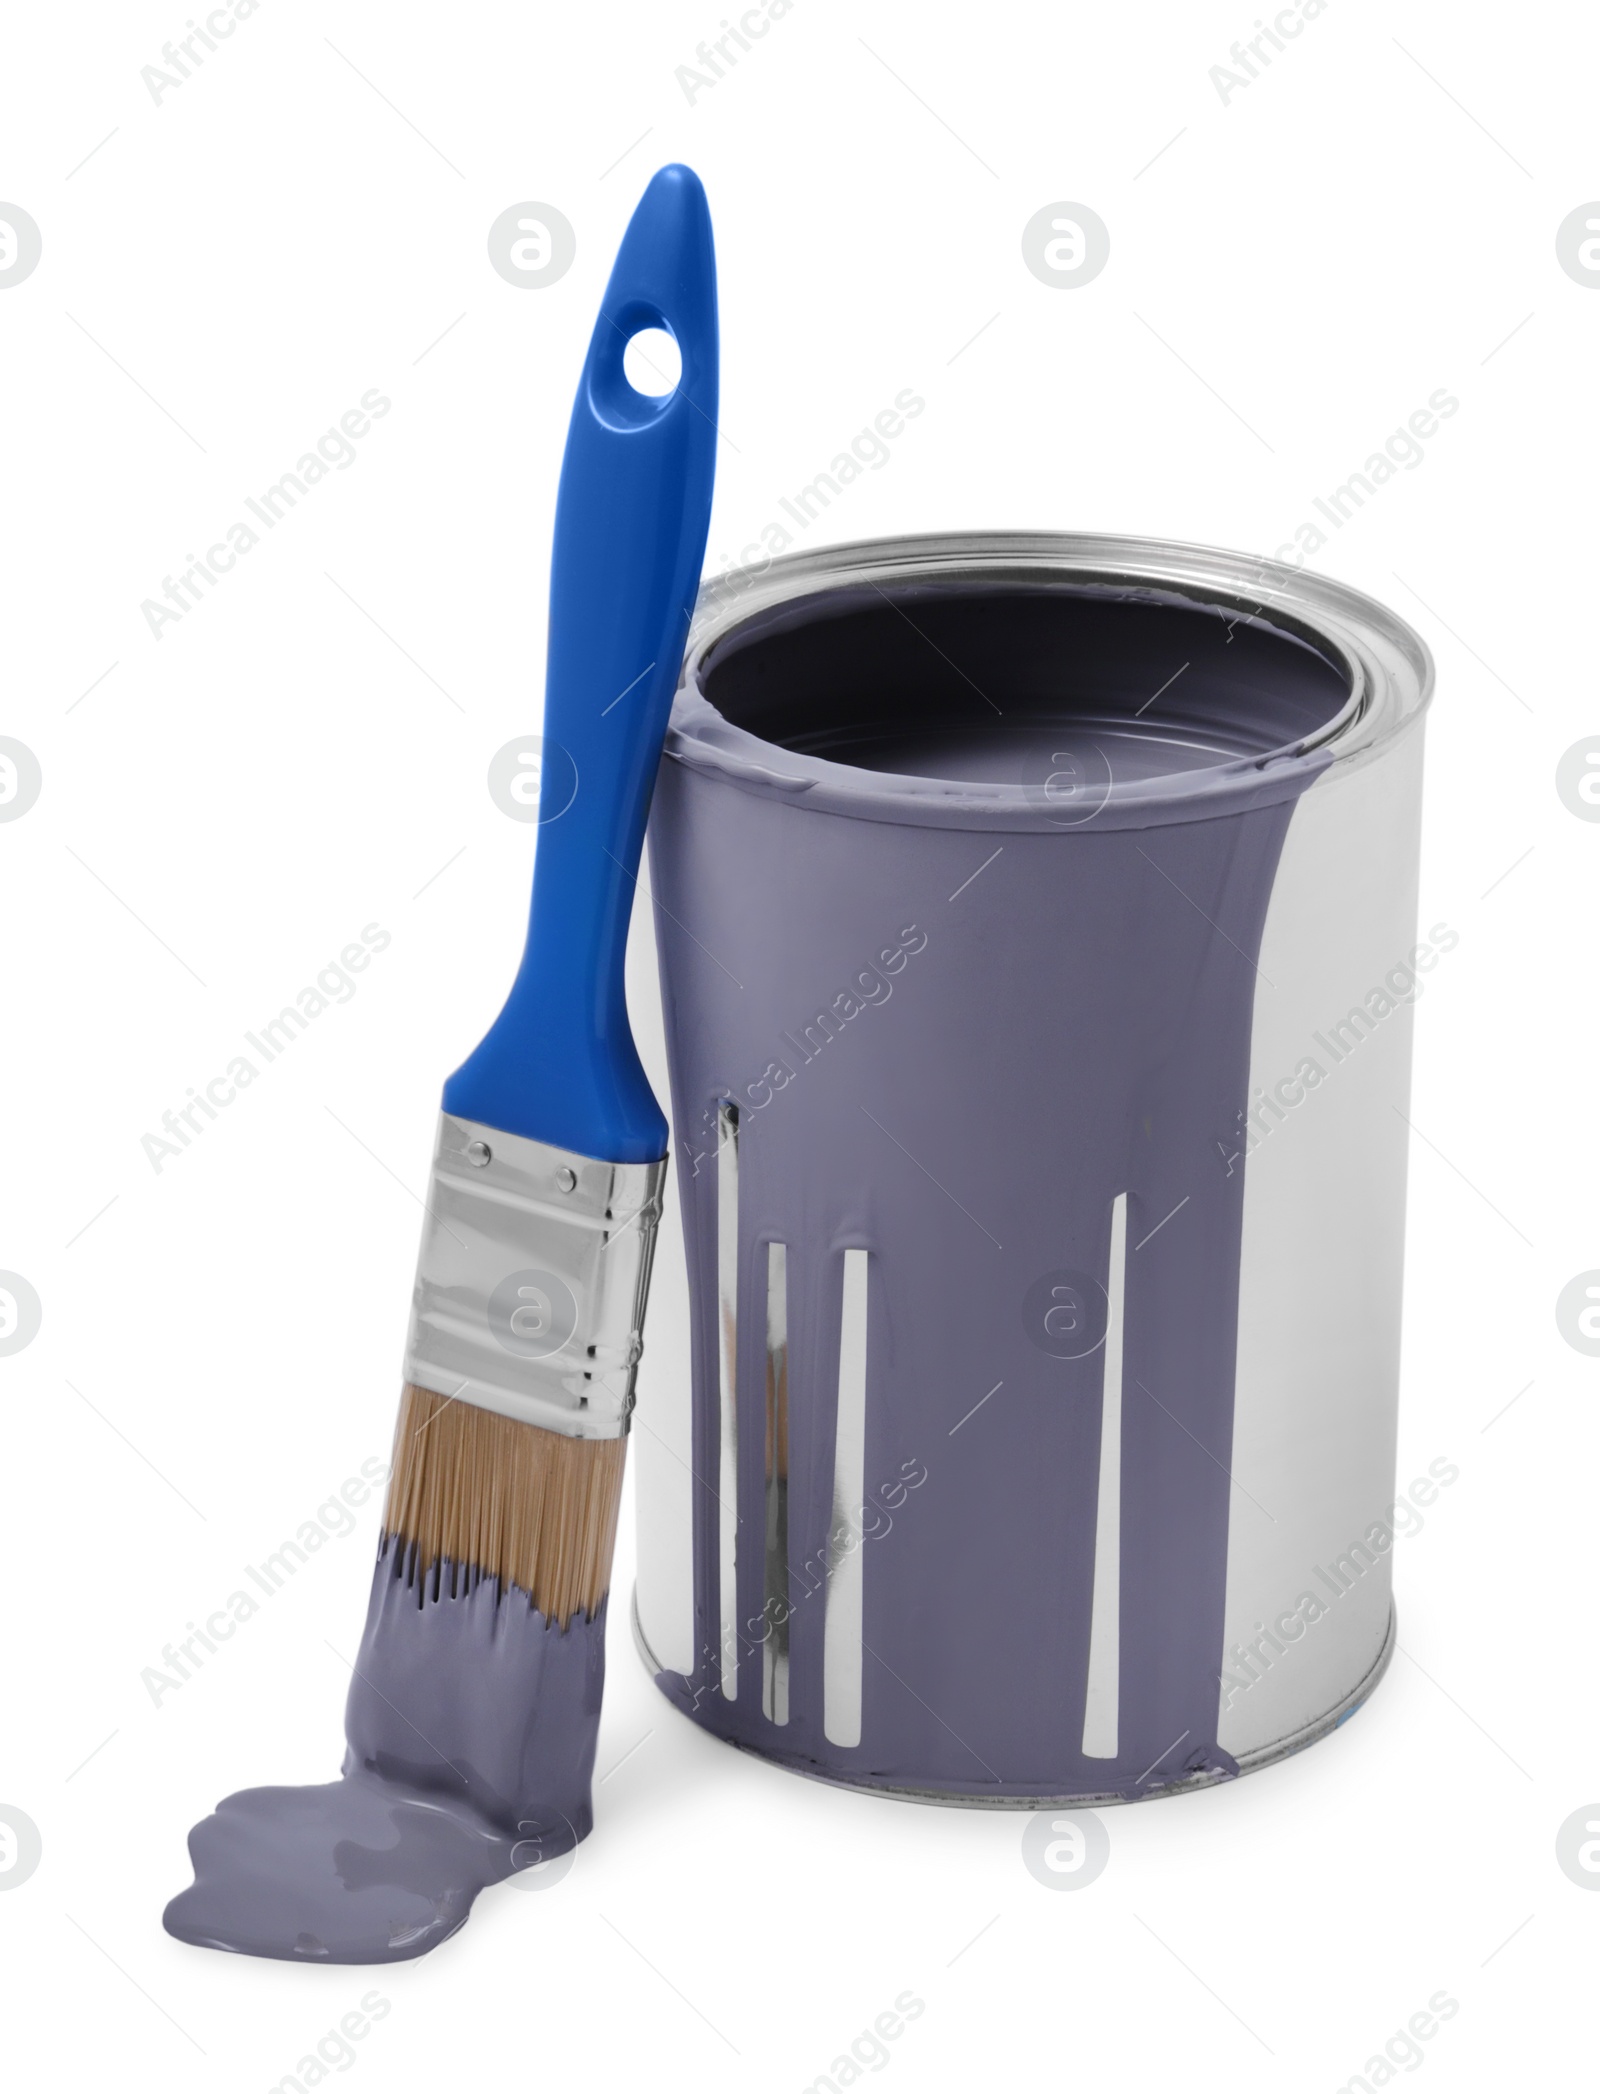 Photo of Can with grey paint and brush on white background